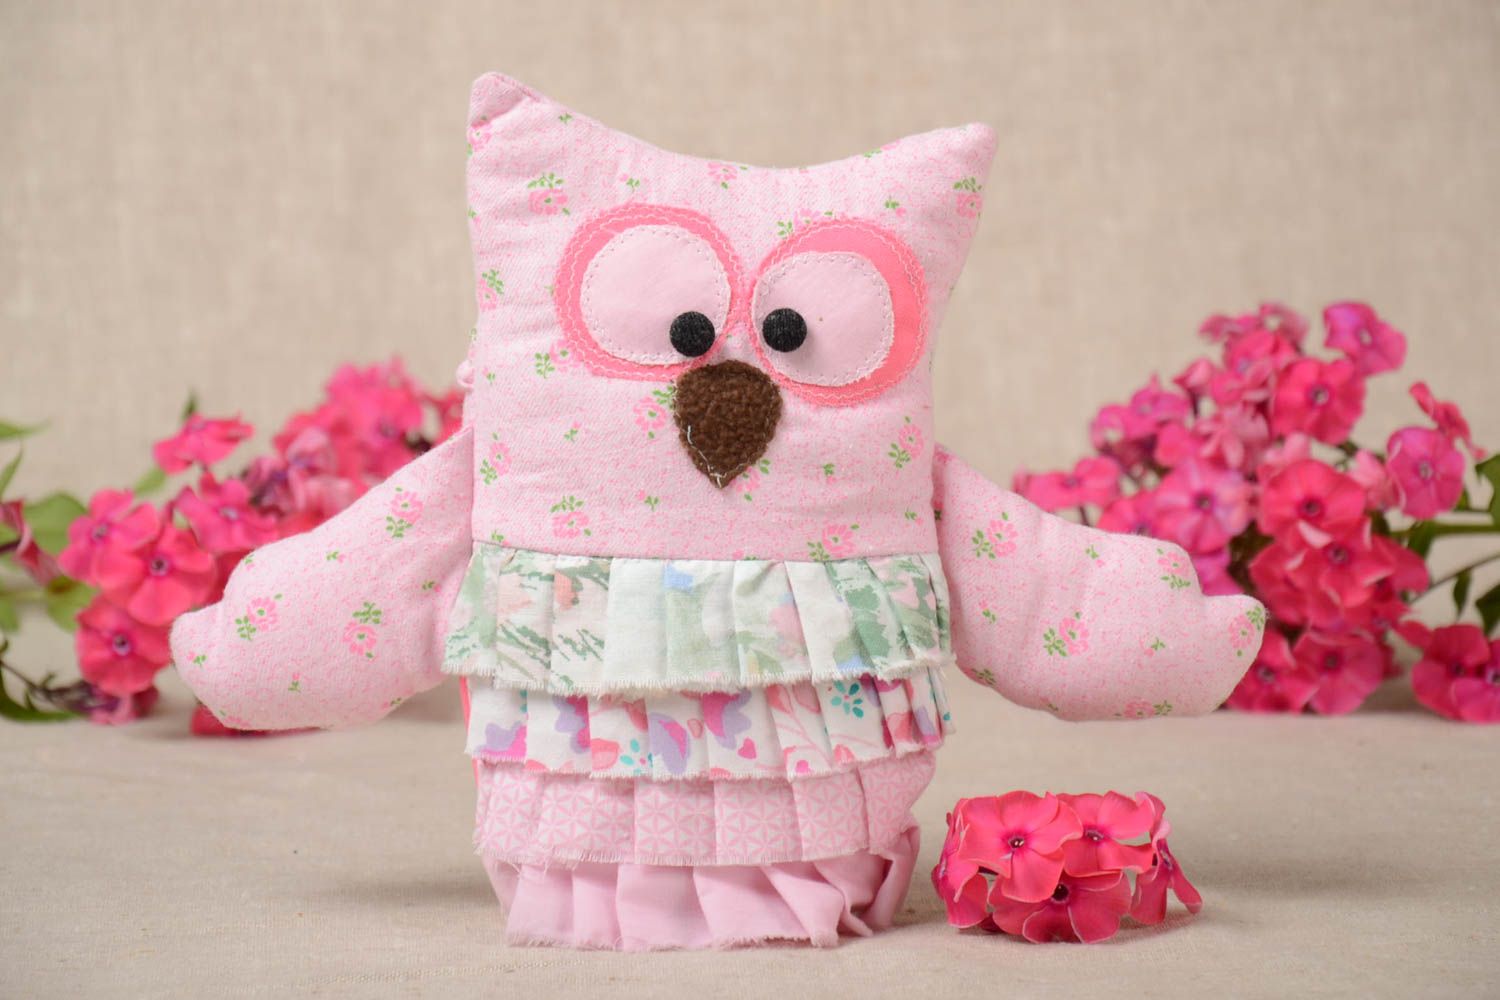 Handmade toy in shape of owl fabric product pink cute gift interior design   photo 1